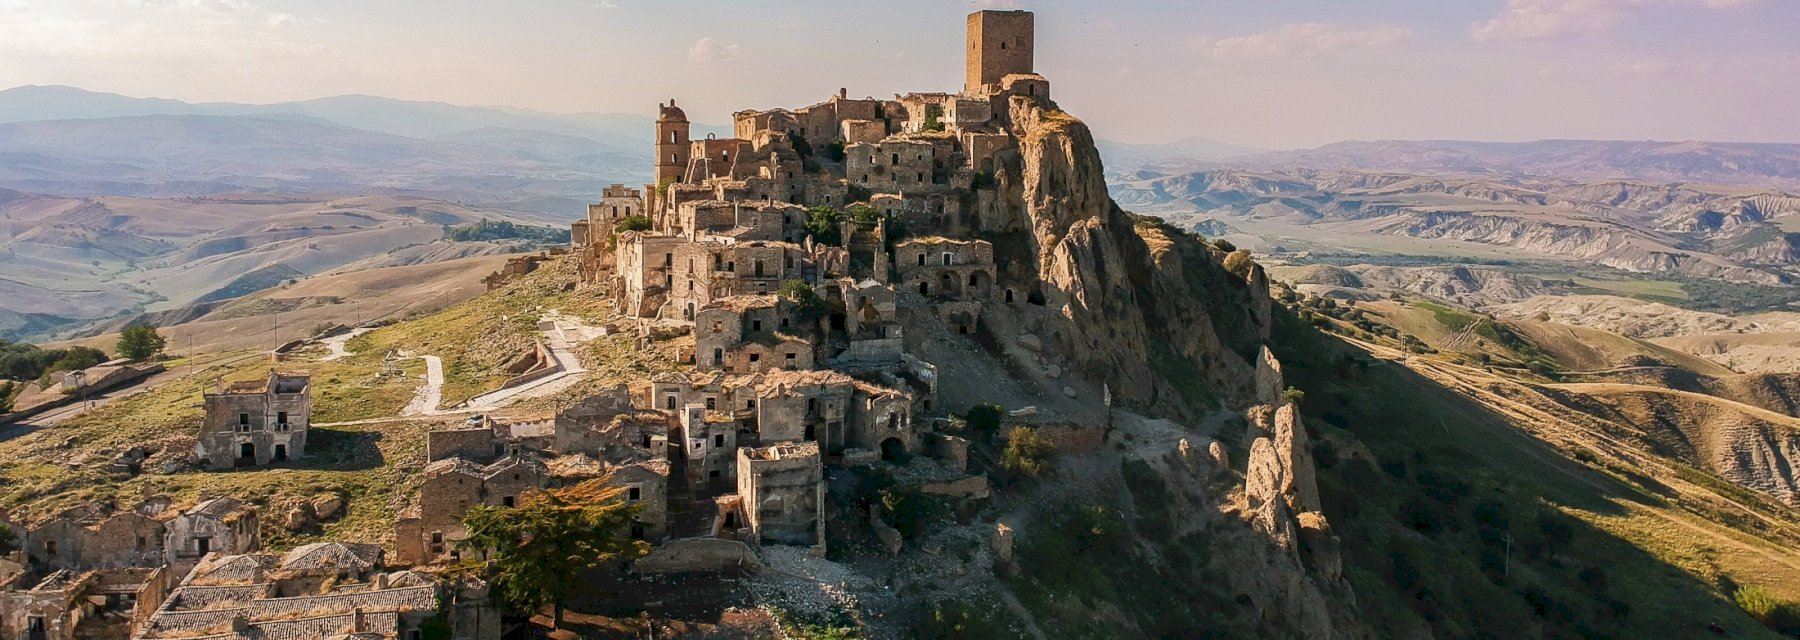 Ghost towns: 6 Abandoned cities in the world that give you goosebumps